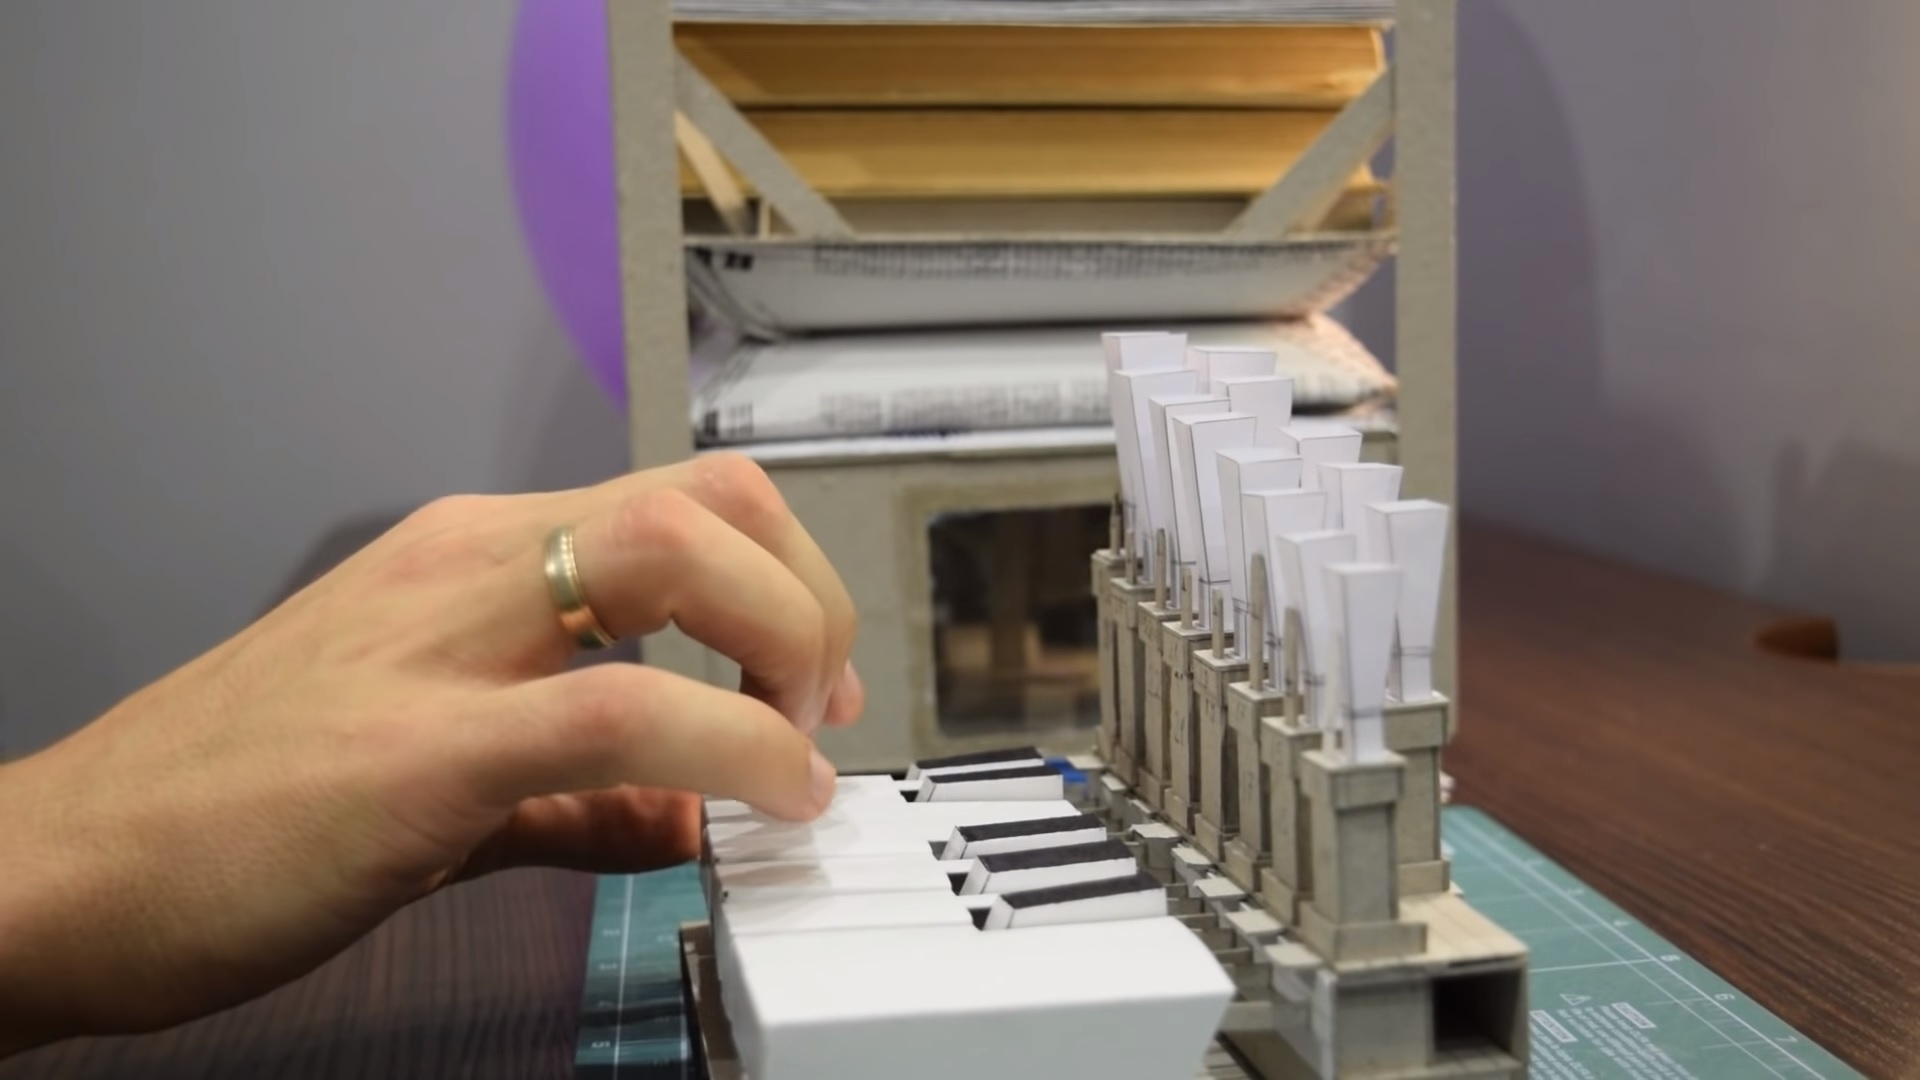 This tiny paper organ can actually be played!